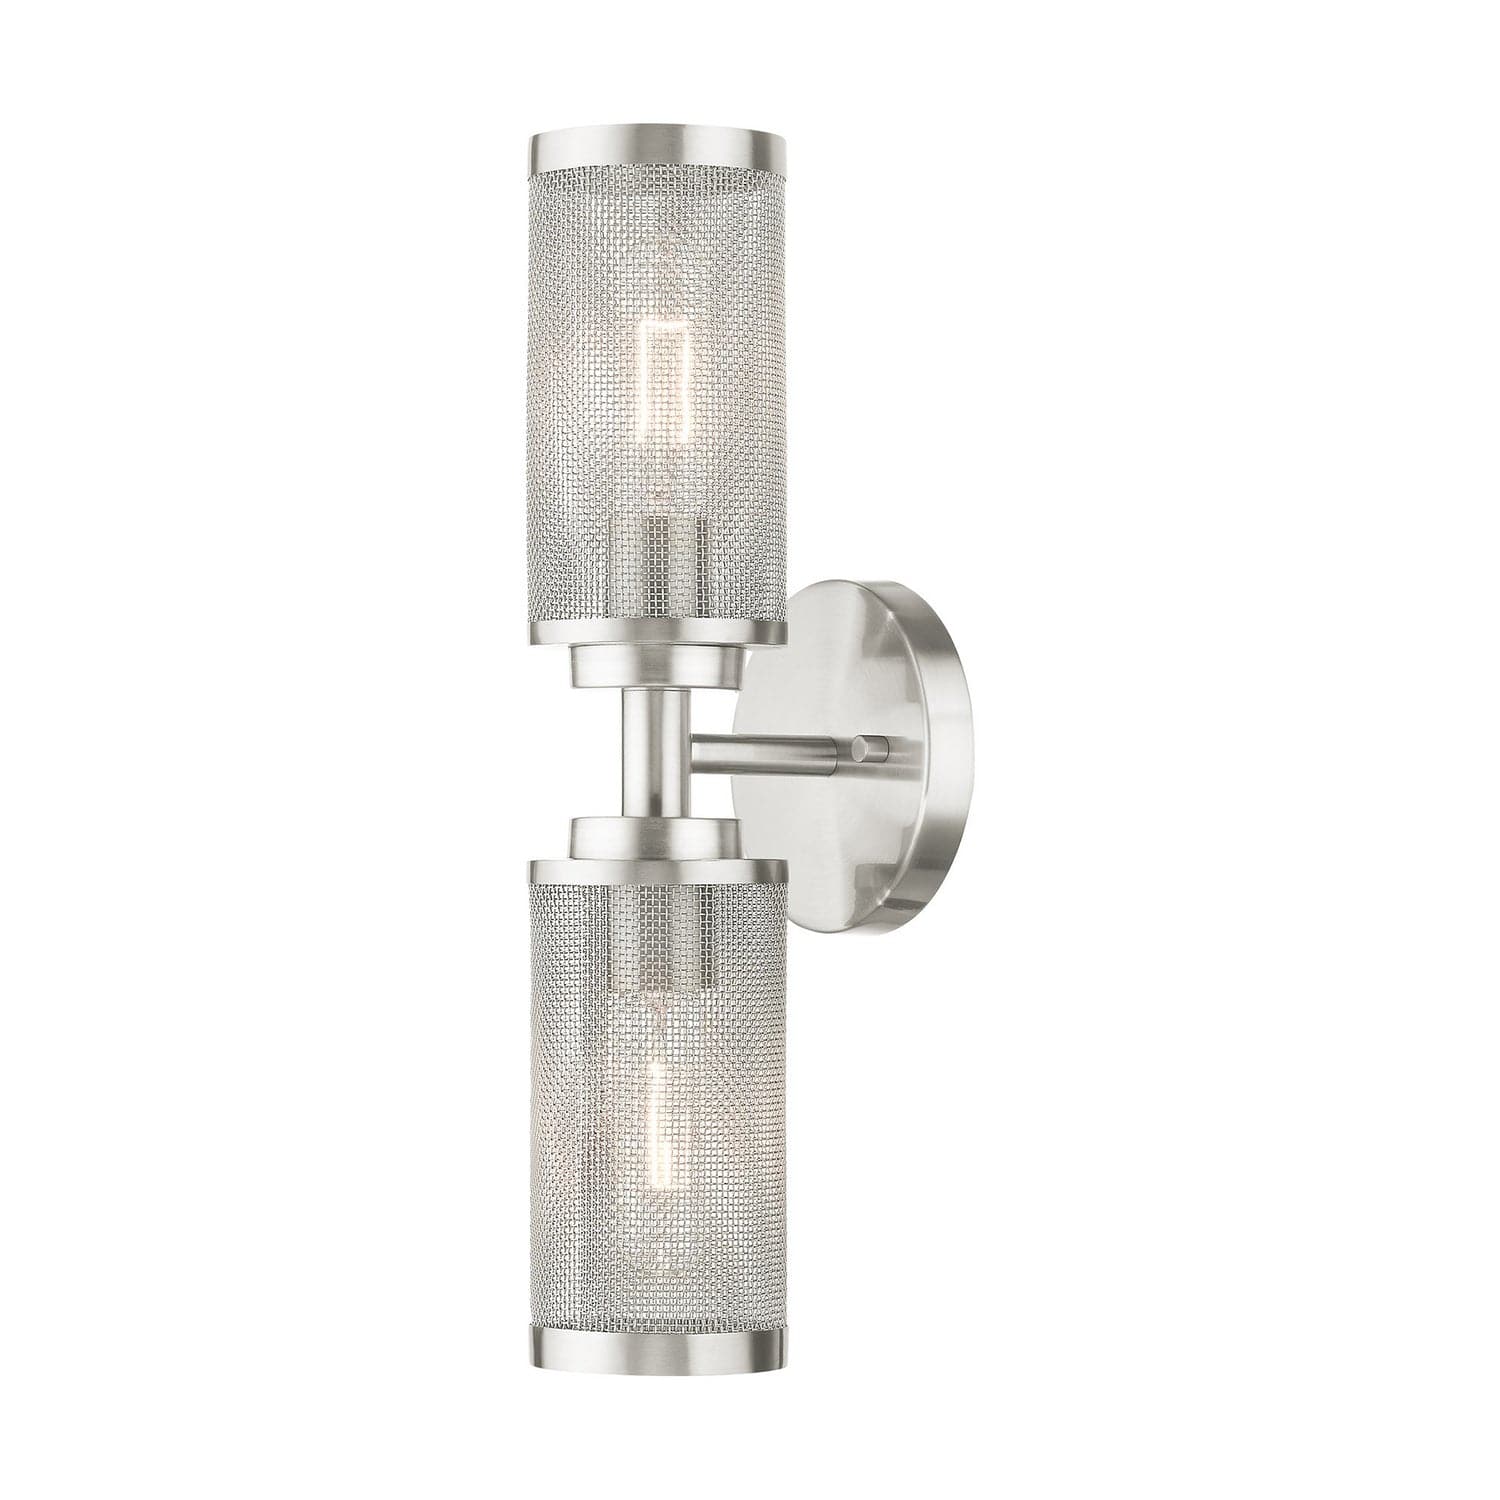 Livex Lighting - 14122-91 - Two Light Wall Sconce - Industro - Brushed Nickel